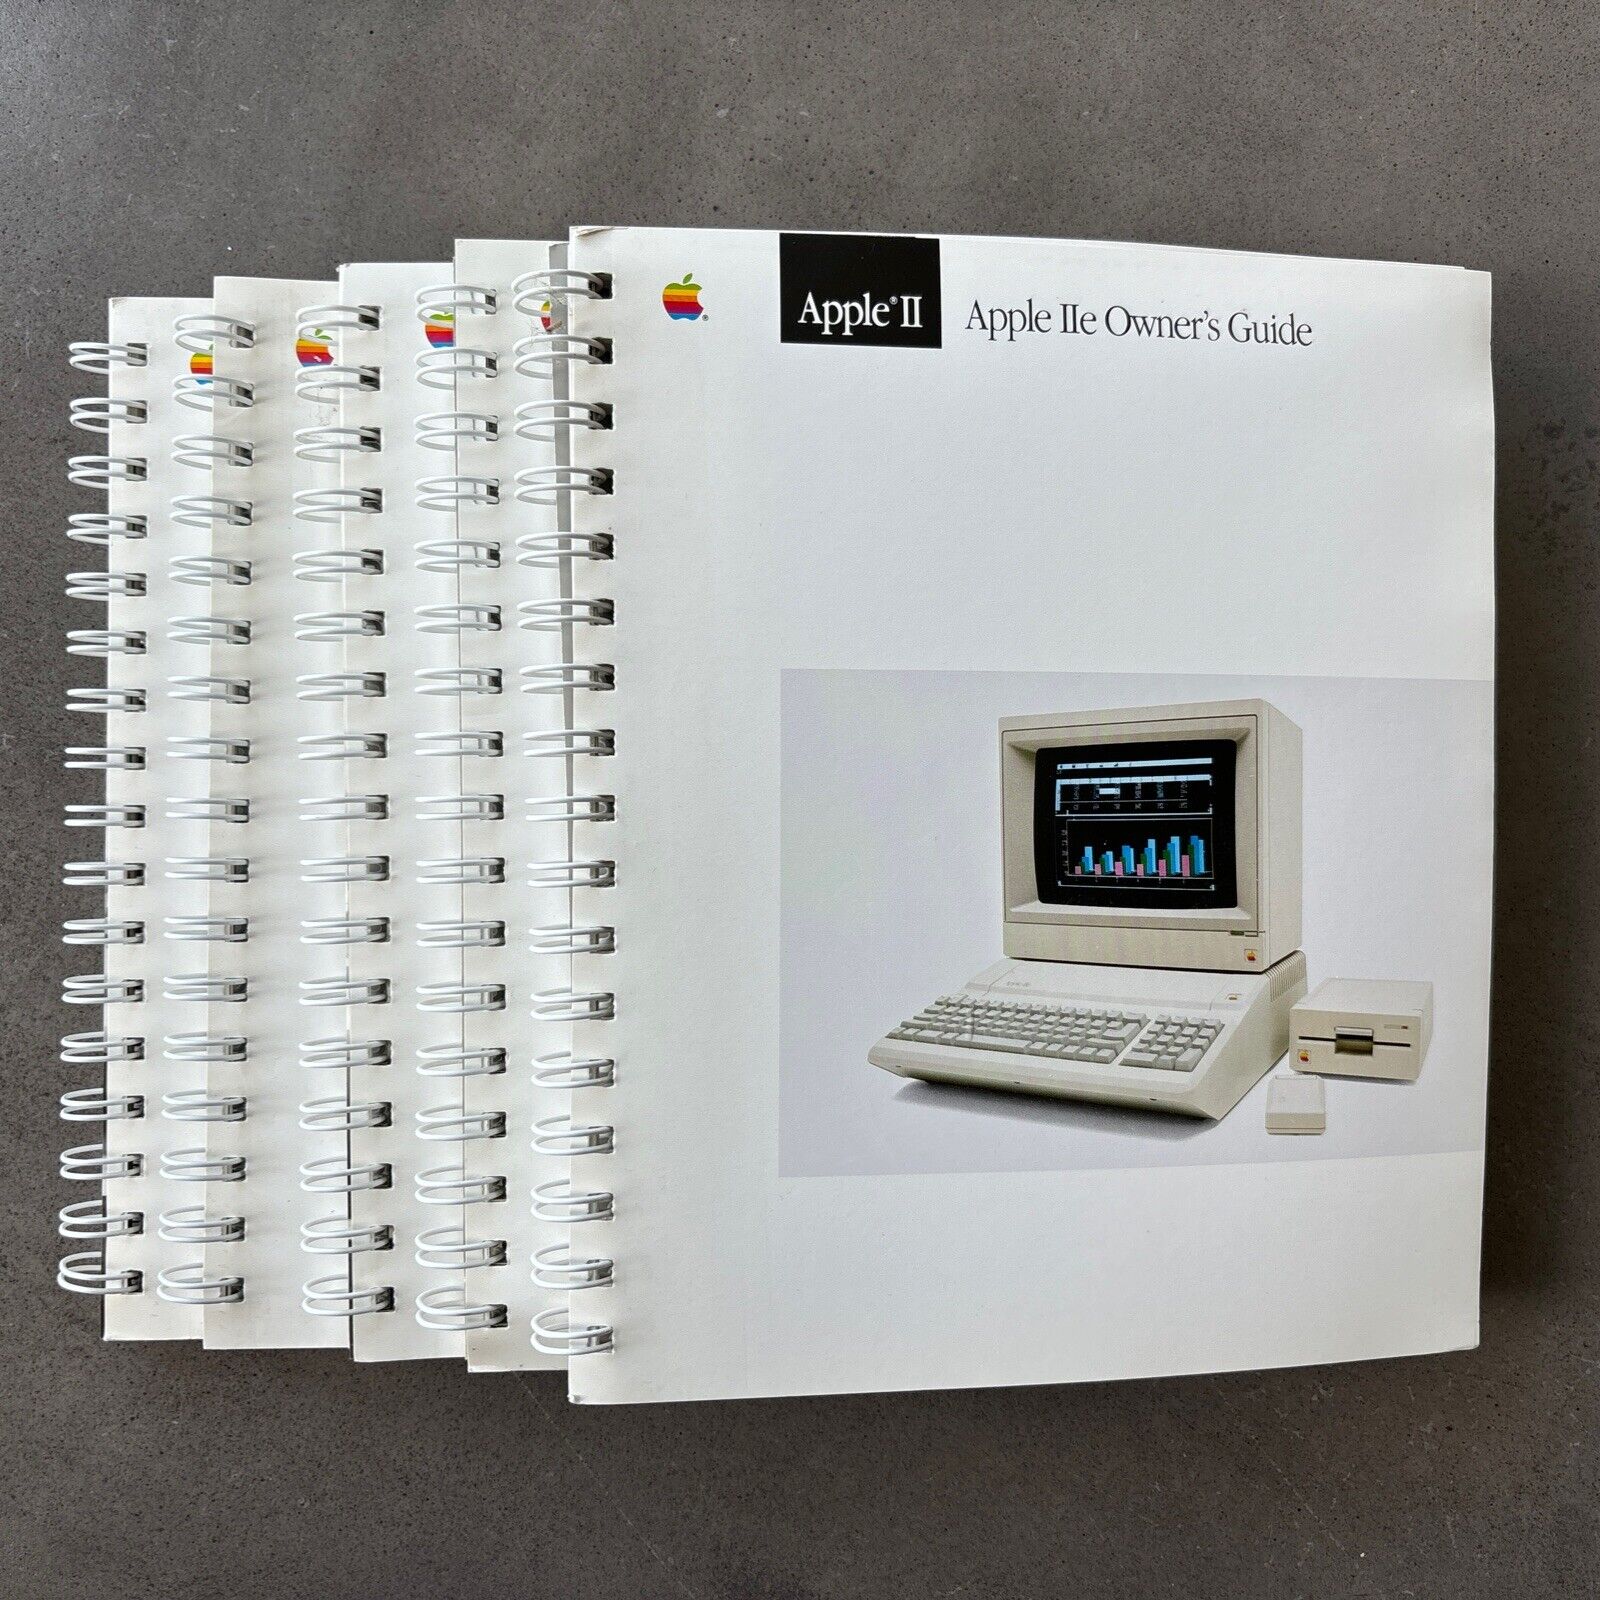 Five Brand New Apple IIe Owner’s Guide 1986 - 168 Pages - 030-1356-B - Rare